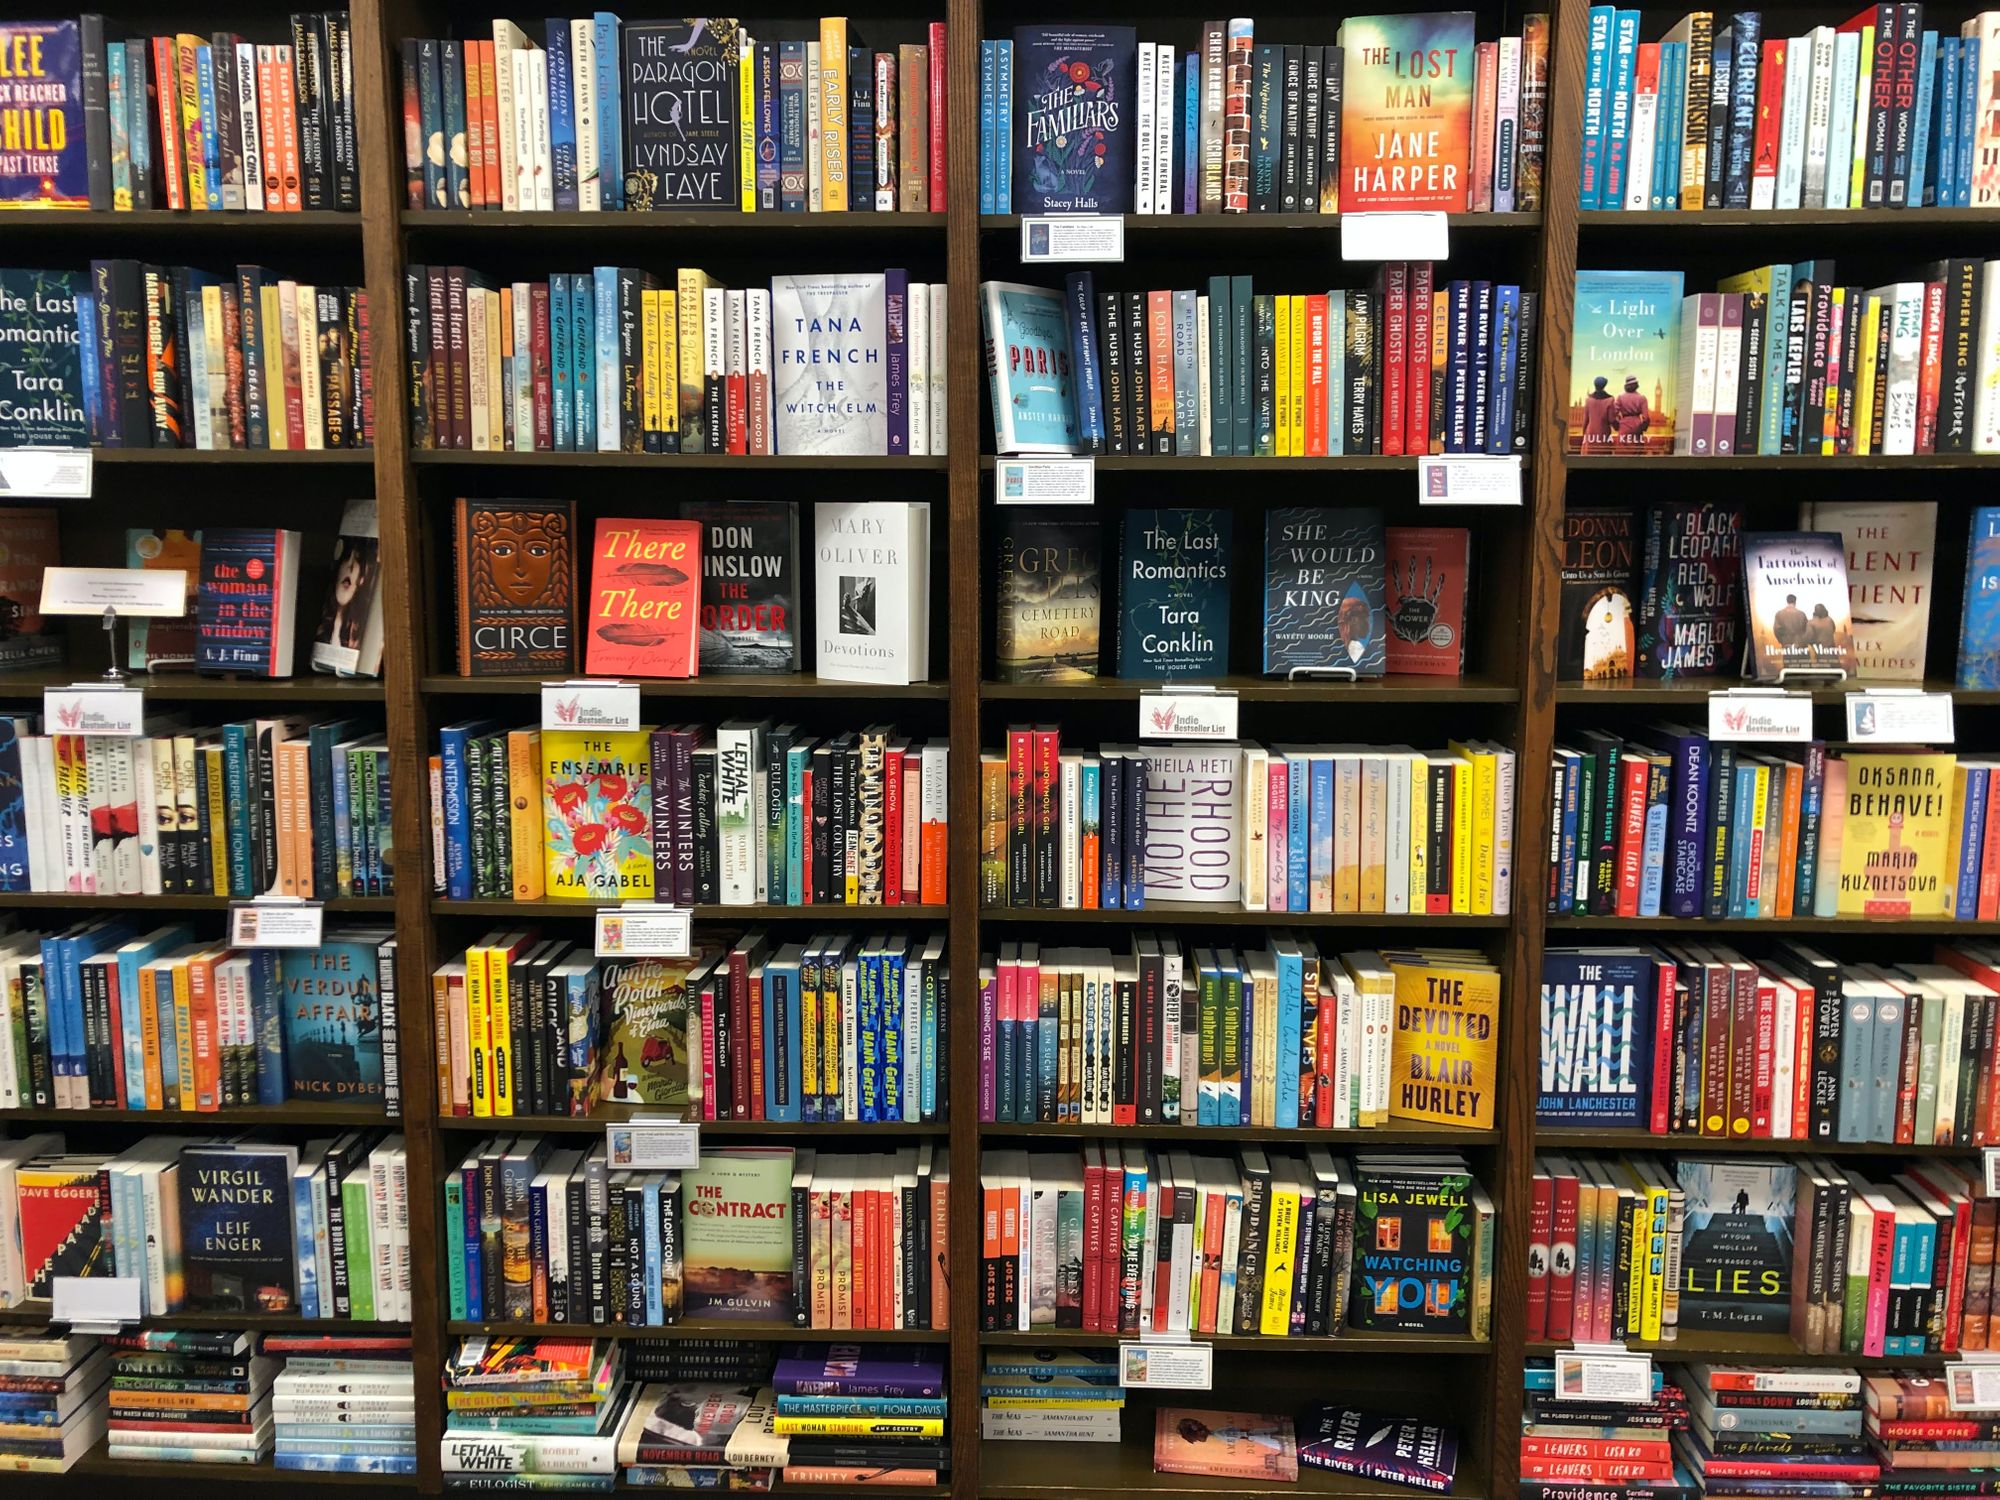 Get to Know Authors From Home: 28 Independent Bookstores With Online Programming